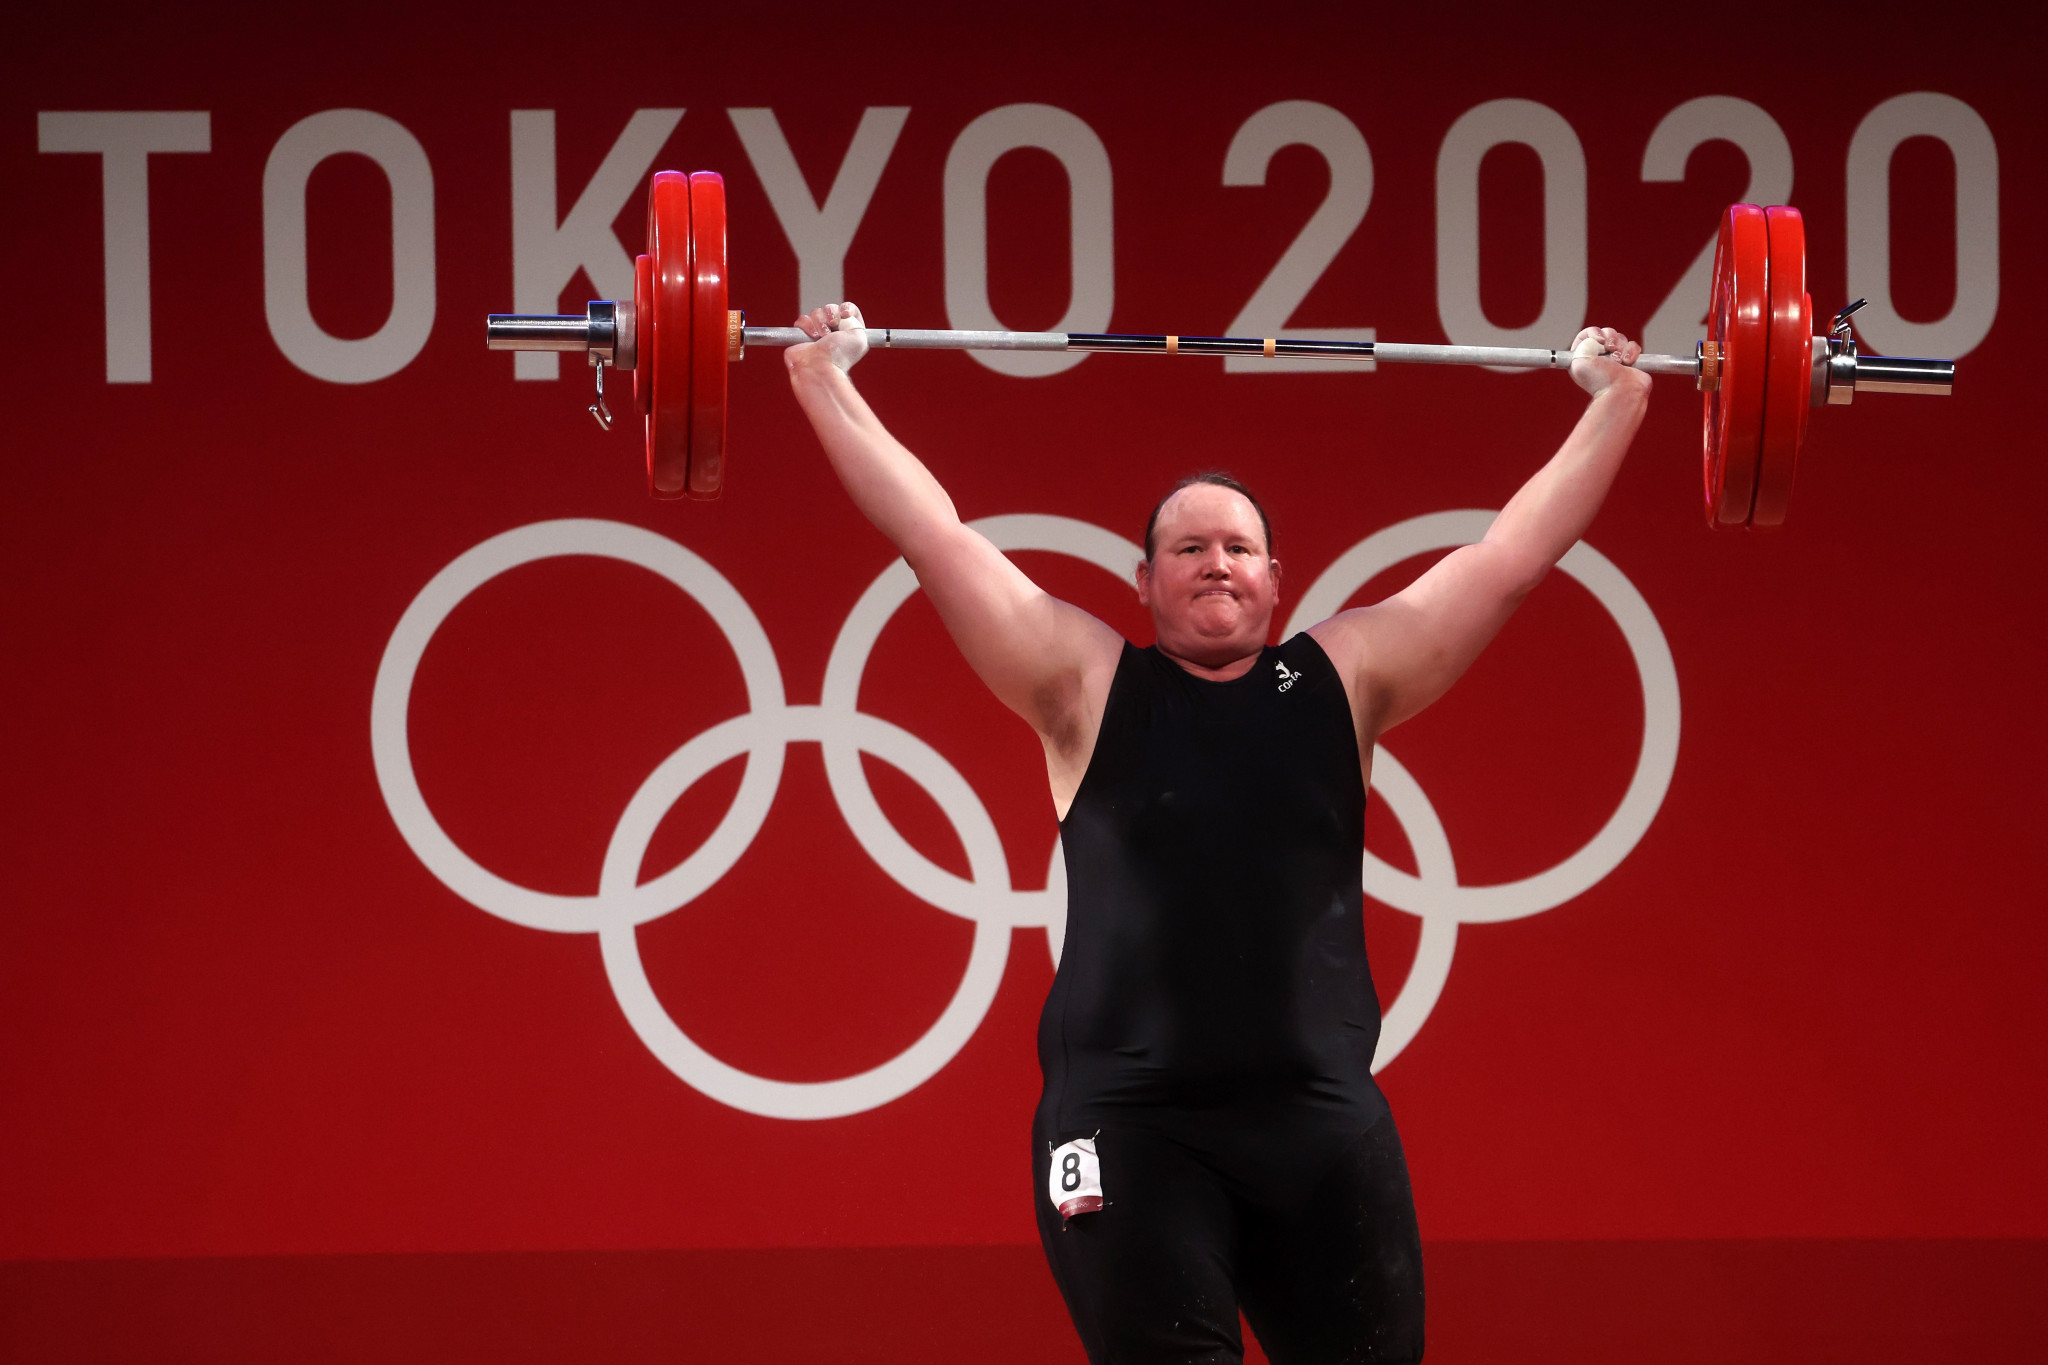 Weightlifter Laurel Hubbard made history by becoming the first transgender athlete to compete at the Olympics when she participated at Tokyo 2020 ©Getty Images